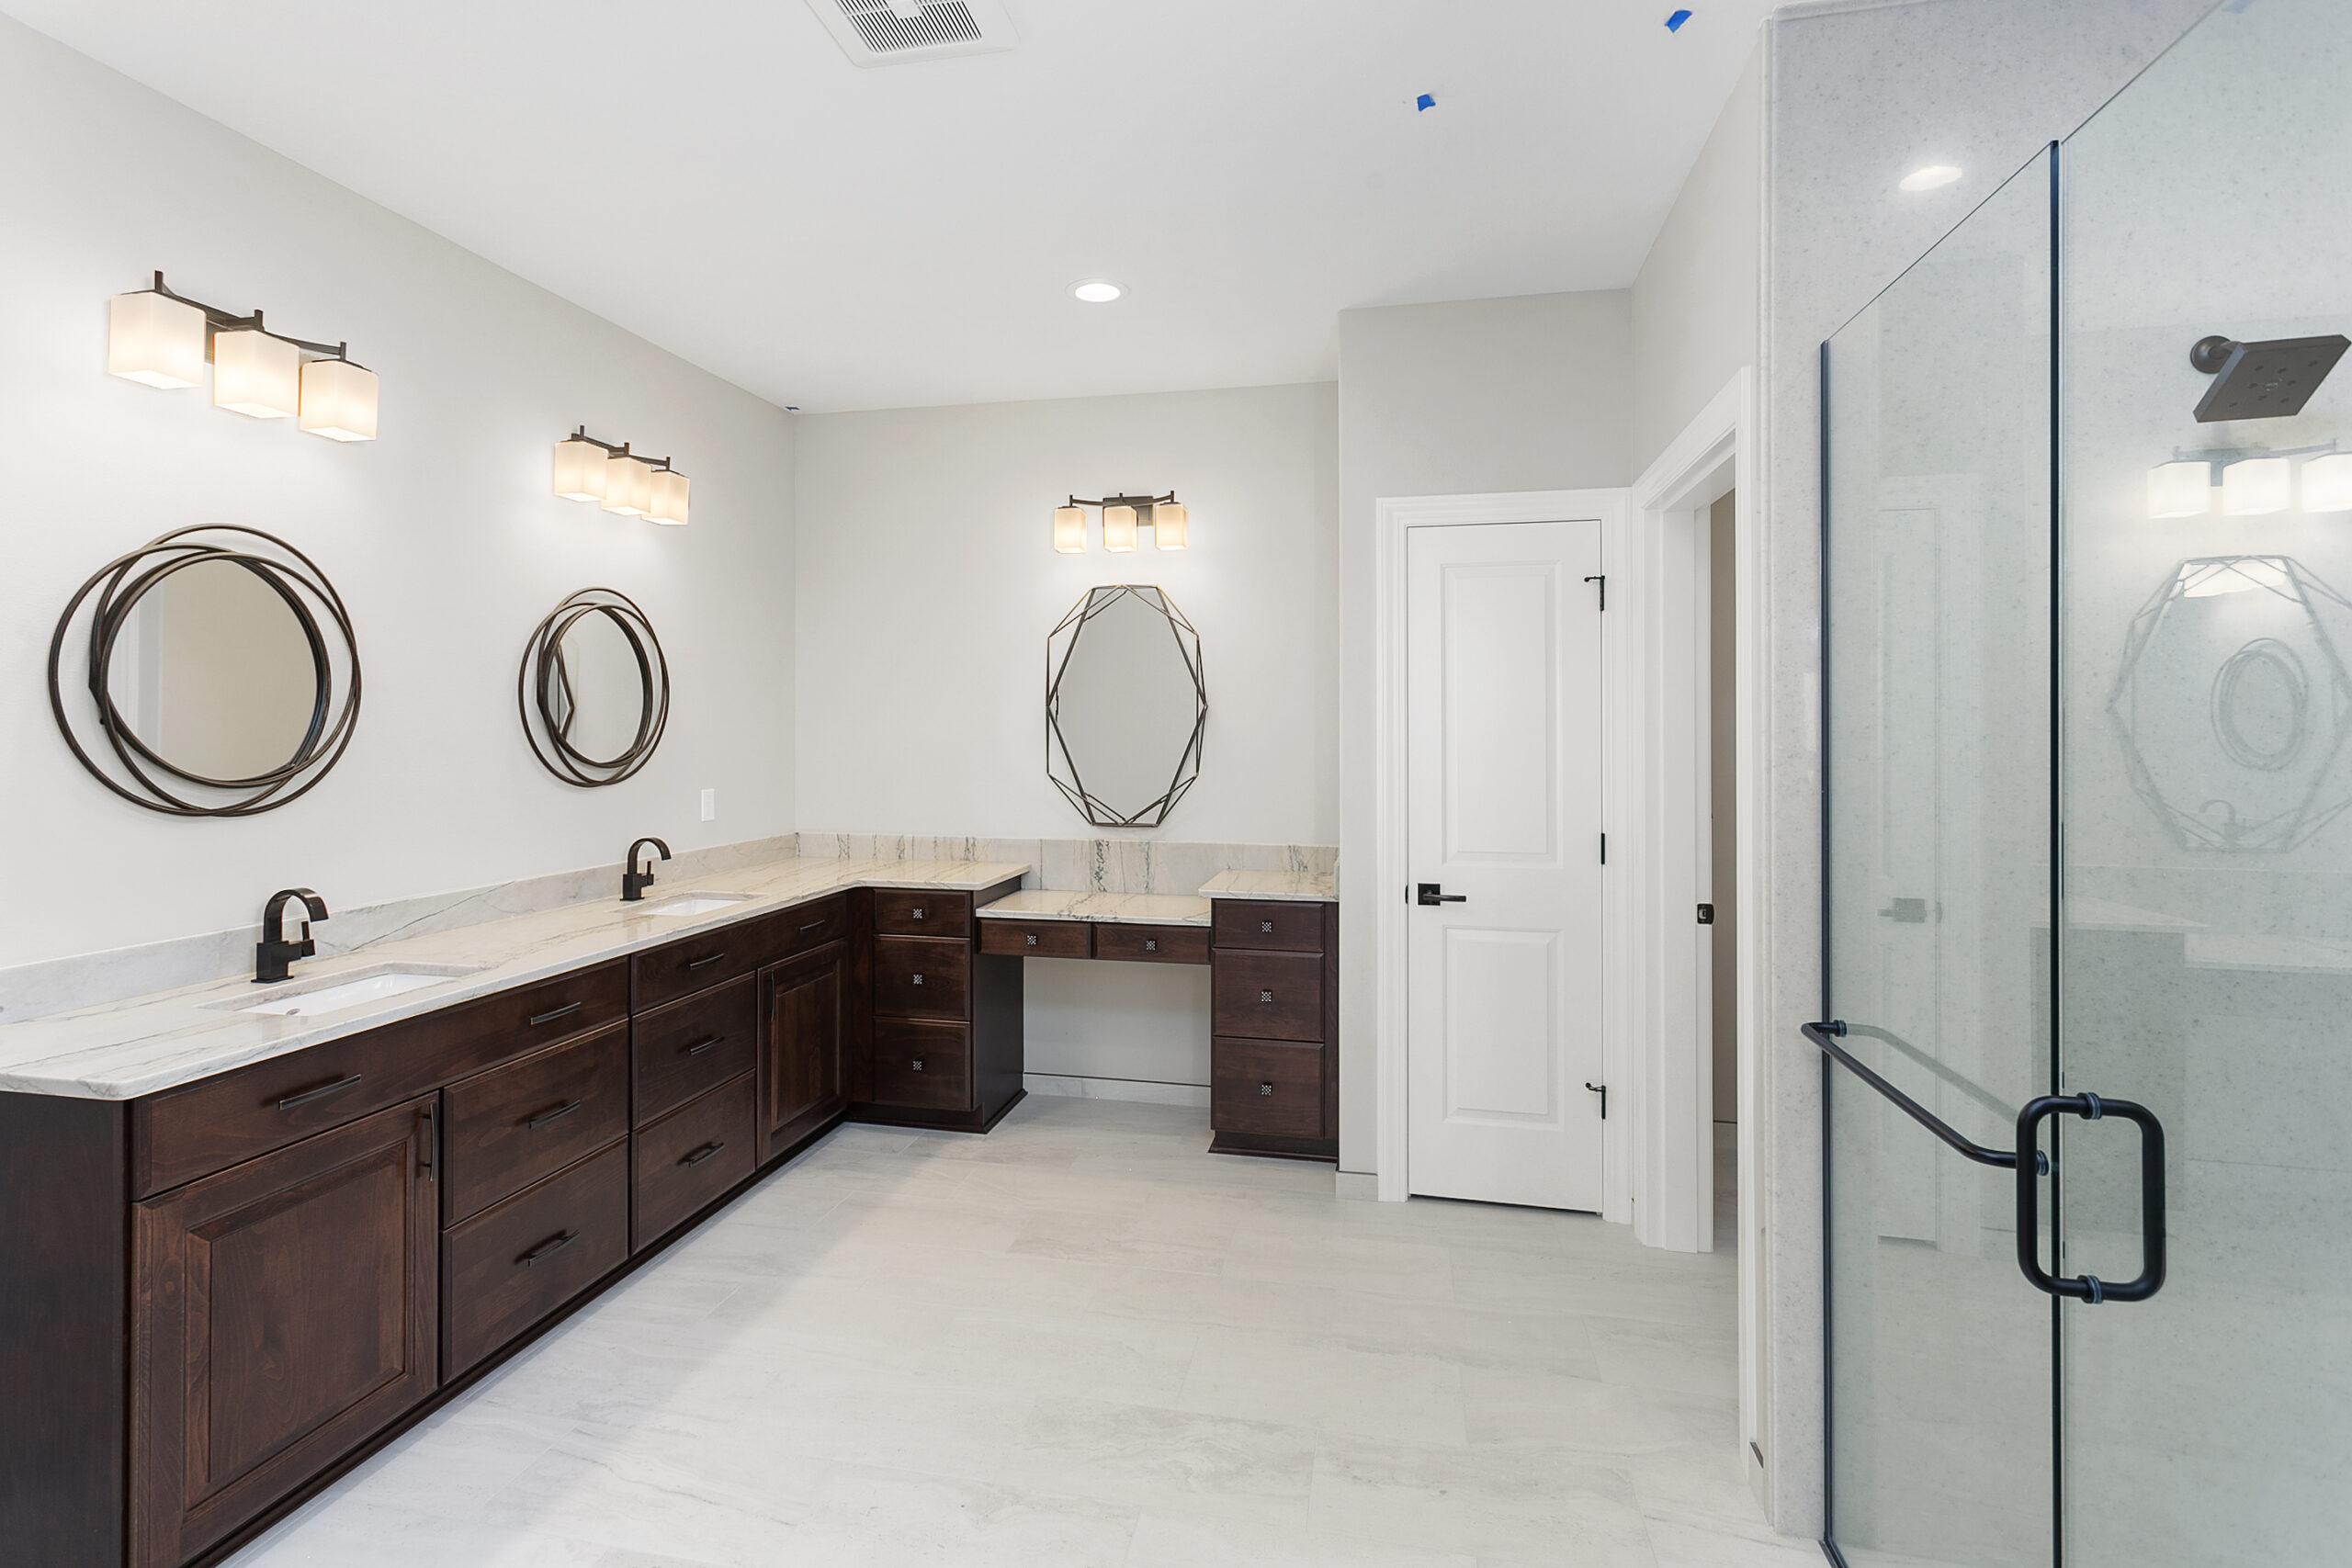 A contemporary modern bathroom design. featuring glass shower stall, and his and her double sink vanity with mirrors.